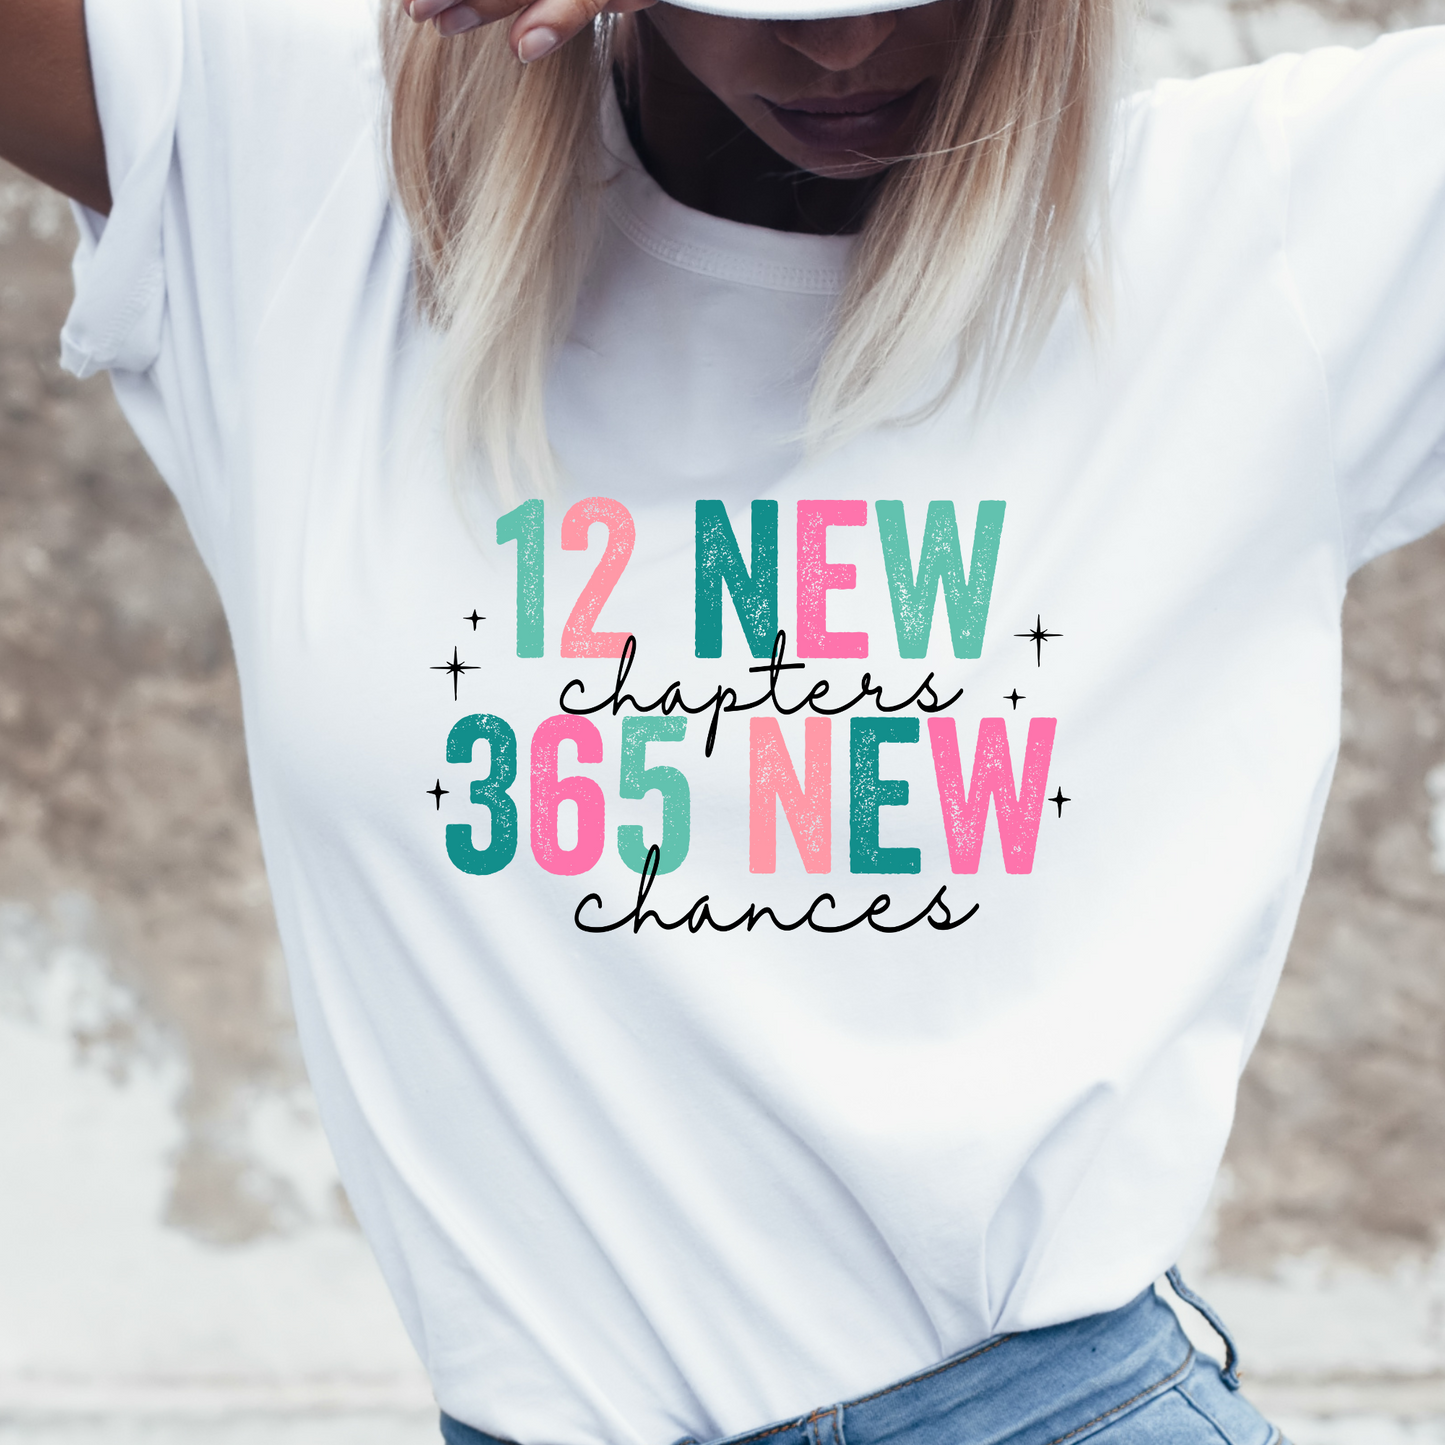 12 New Chapters, 365 New Chances